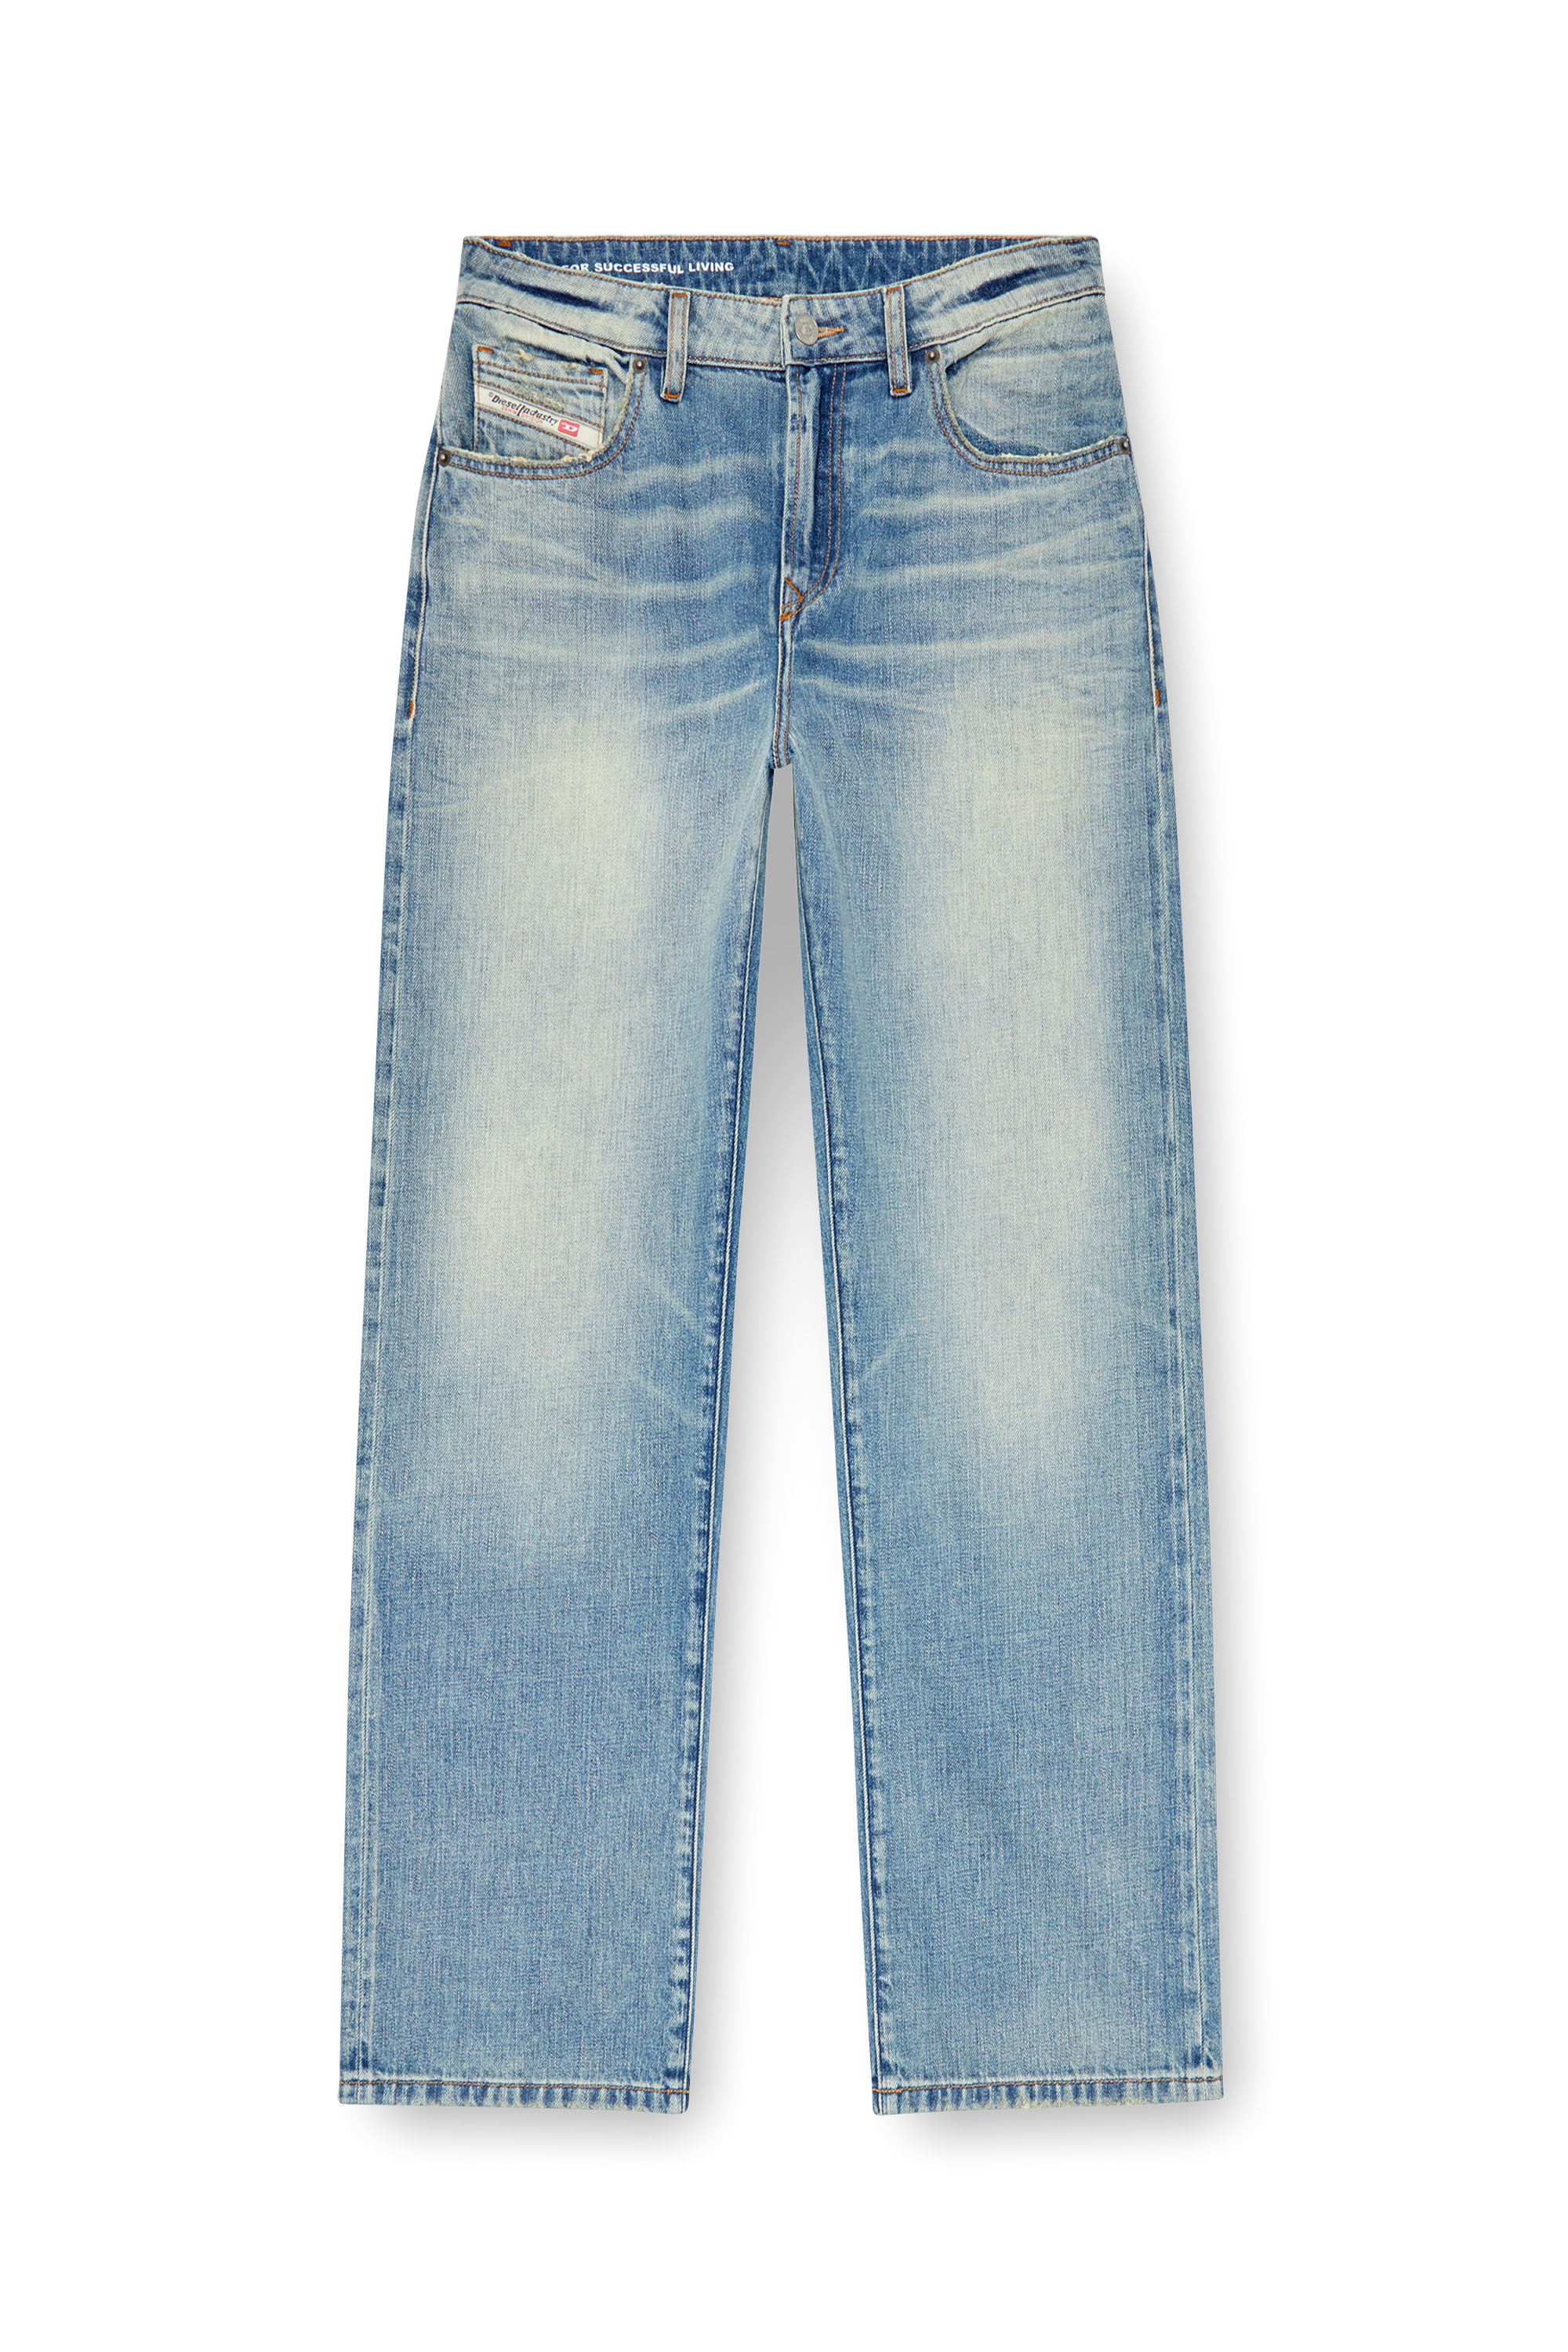 Diesel - Straight Jeans 1999 D-Reggy 0GRDN, Mujer Straight Jeans - 1999 D-Reggy in Azul marino - Image 3